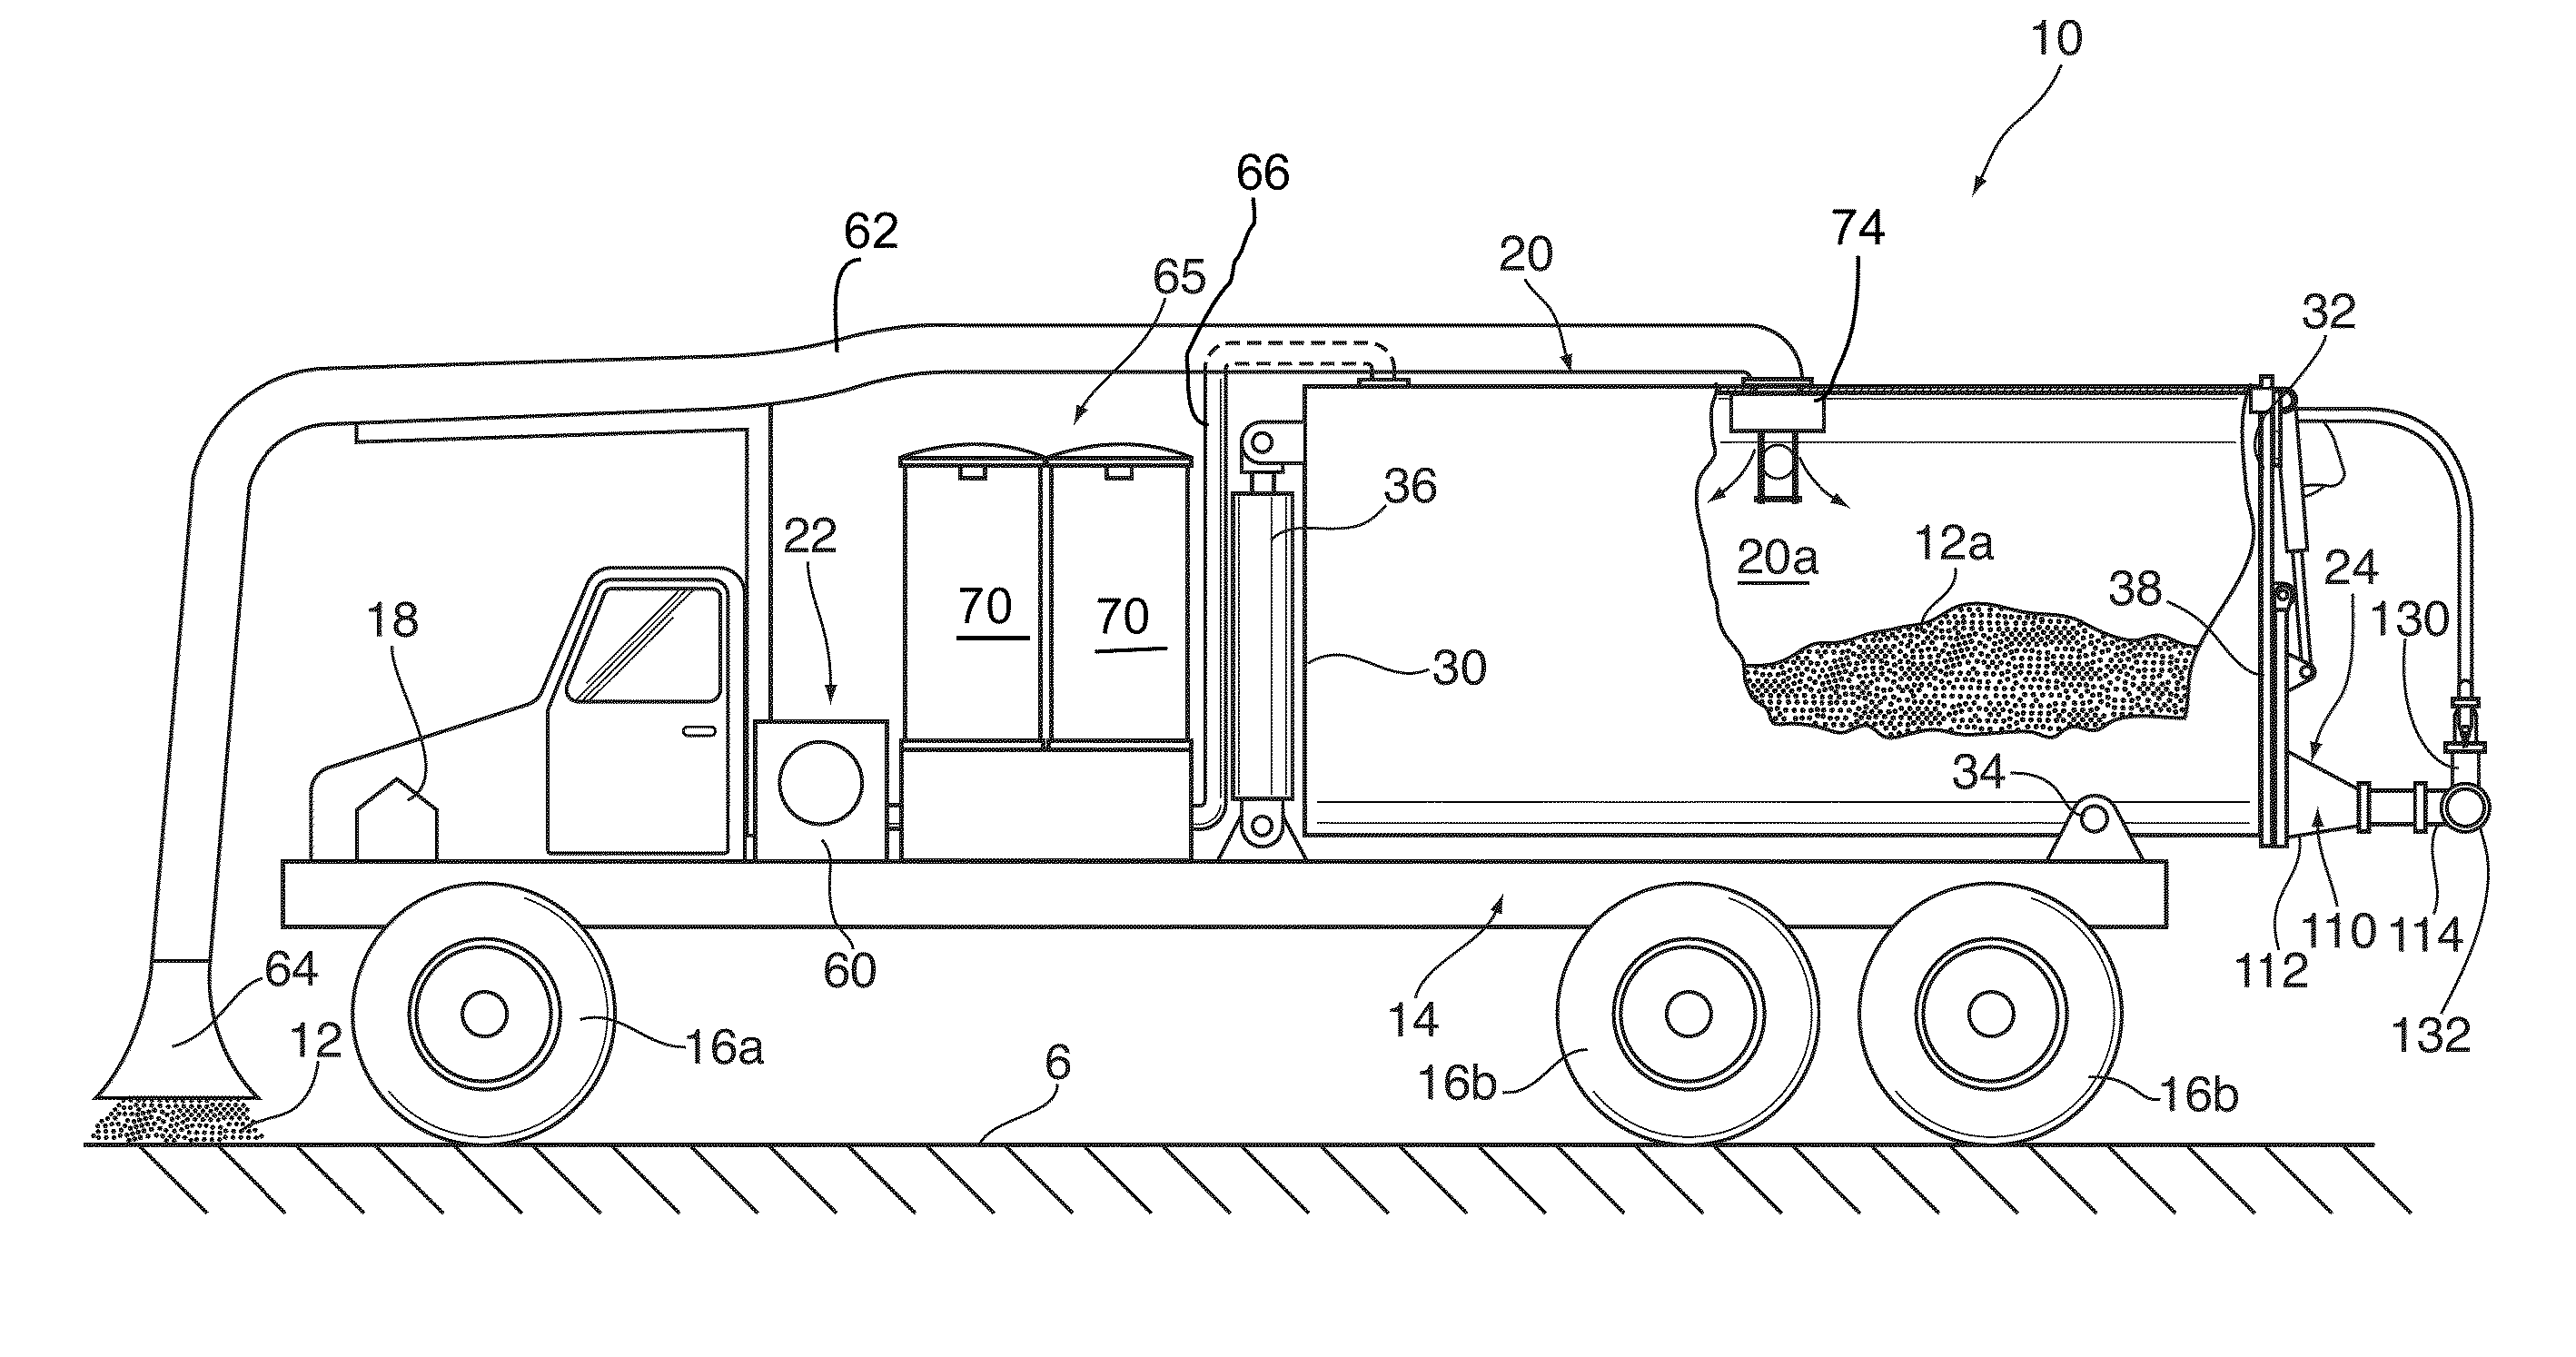 Vacuum Truck With Pneumatic Transfer System